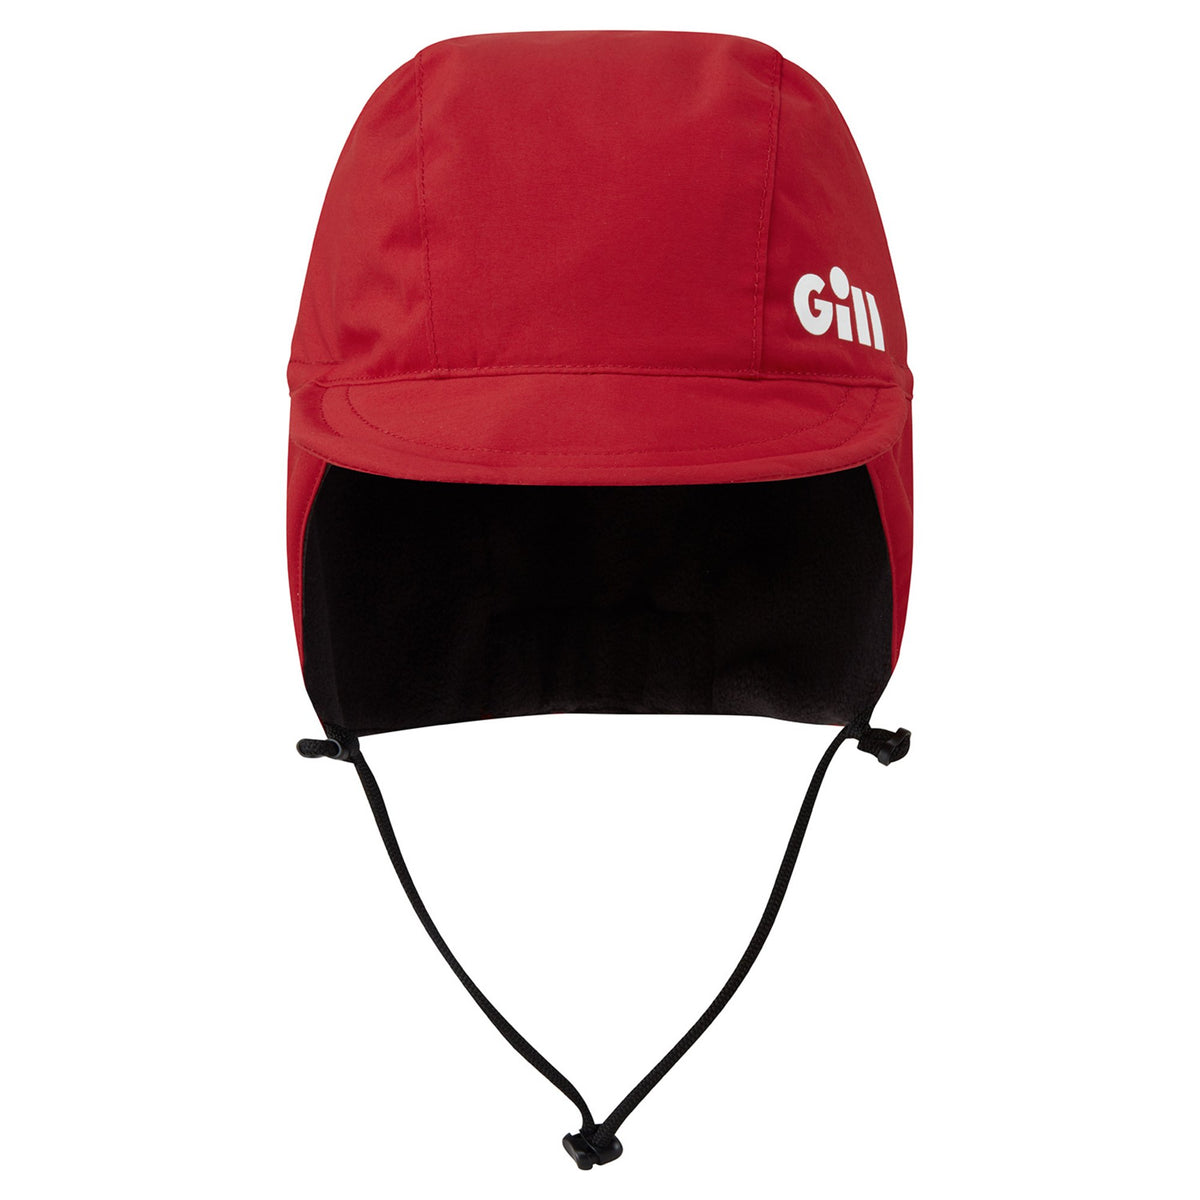 GILL Offshore Hat - One Size